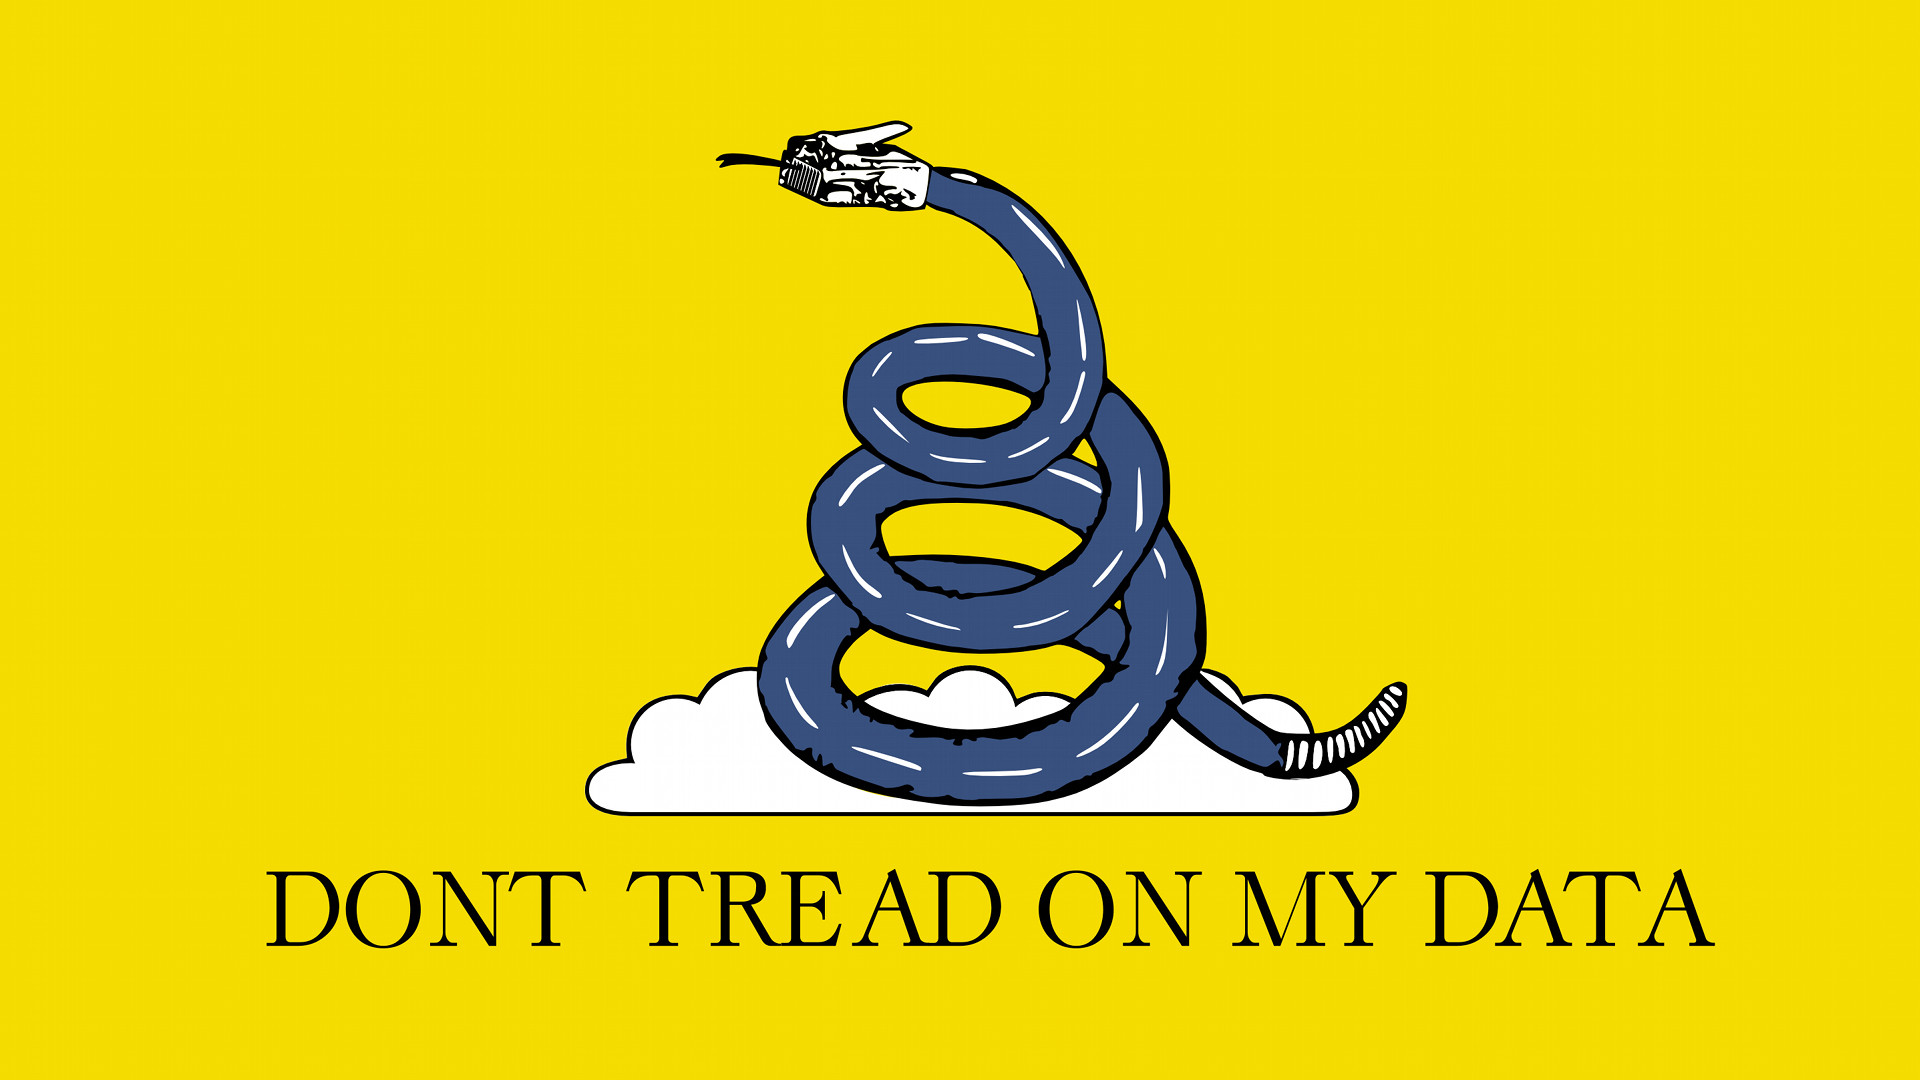 Dont Tread On Me Wallpaper Image